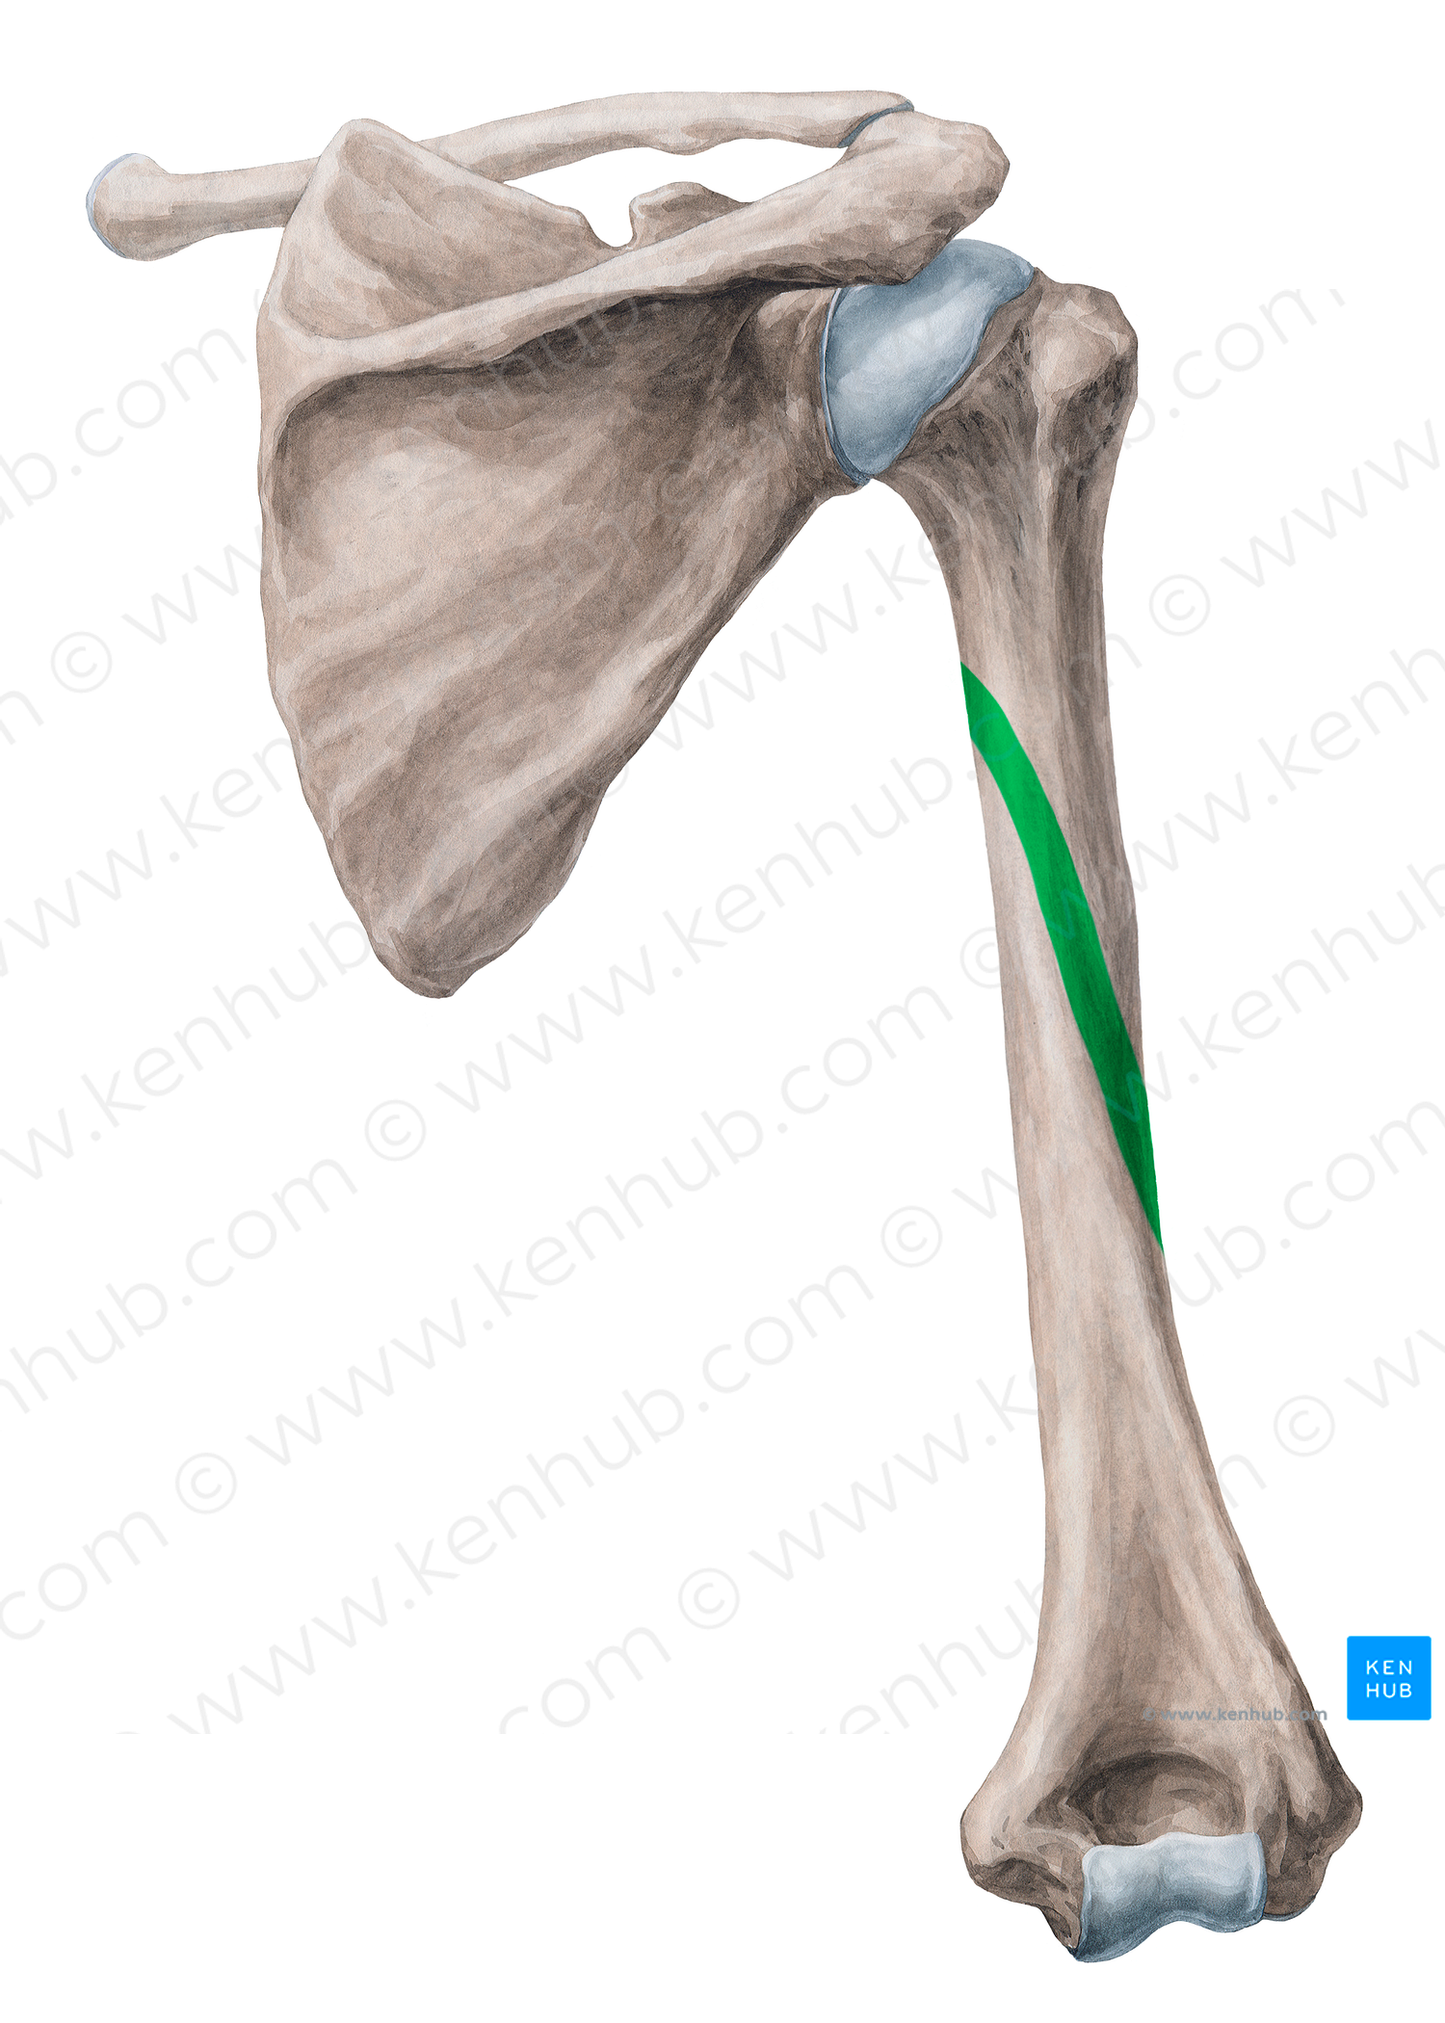 Radial groove of humerus (#19942)